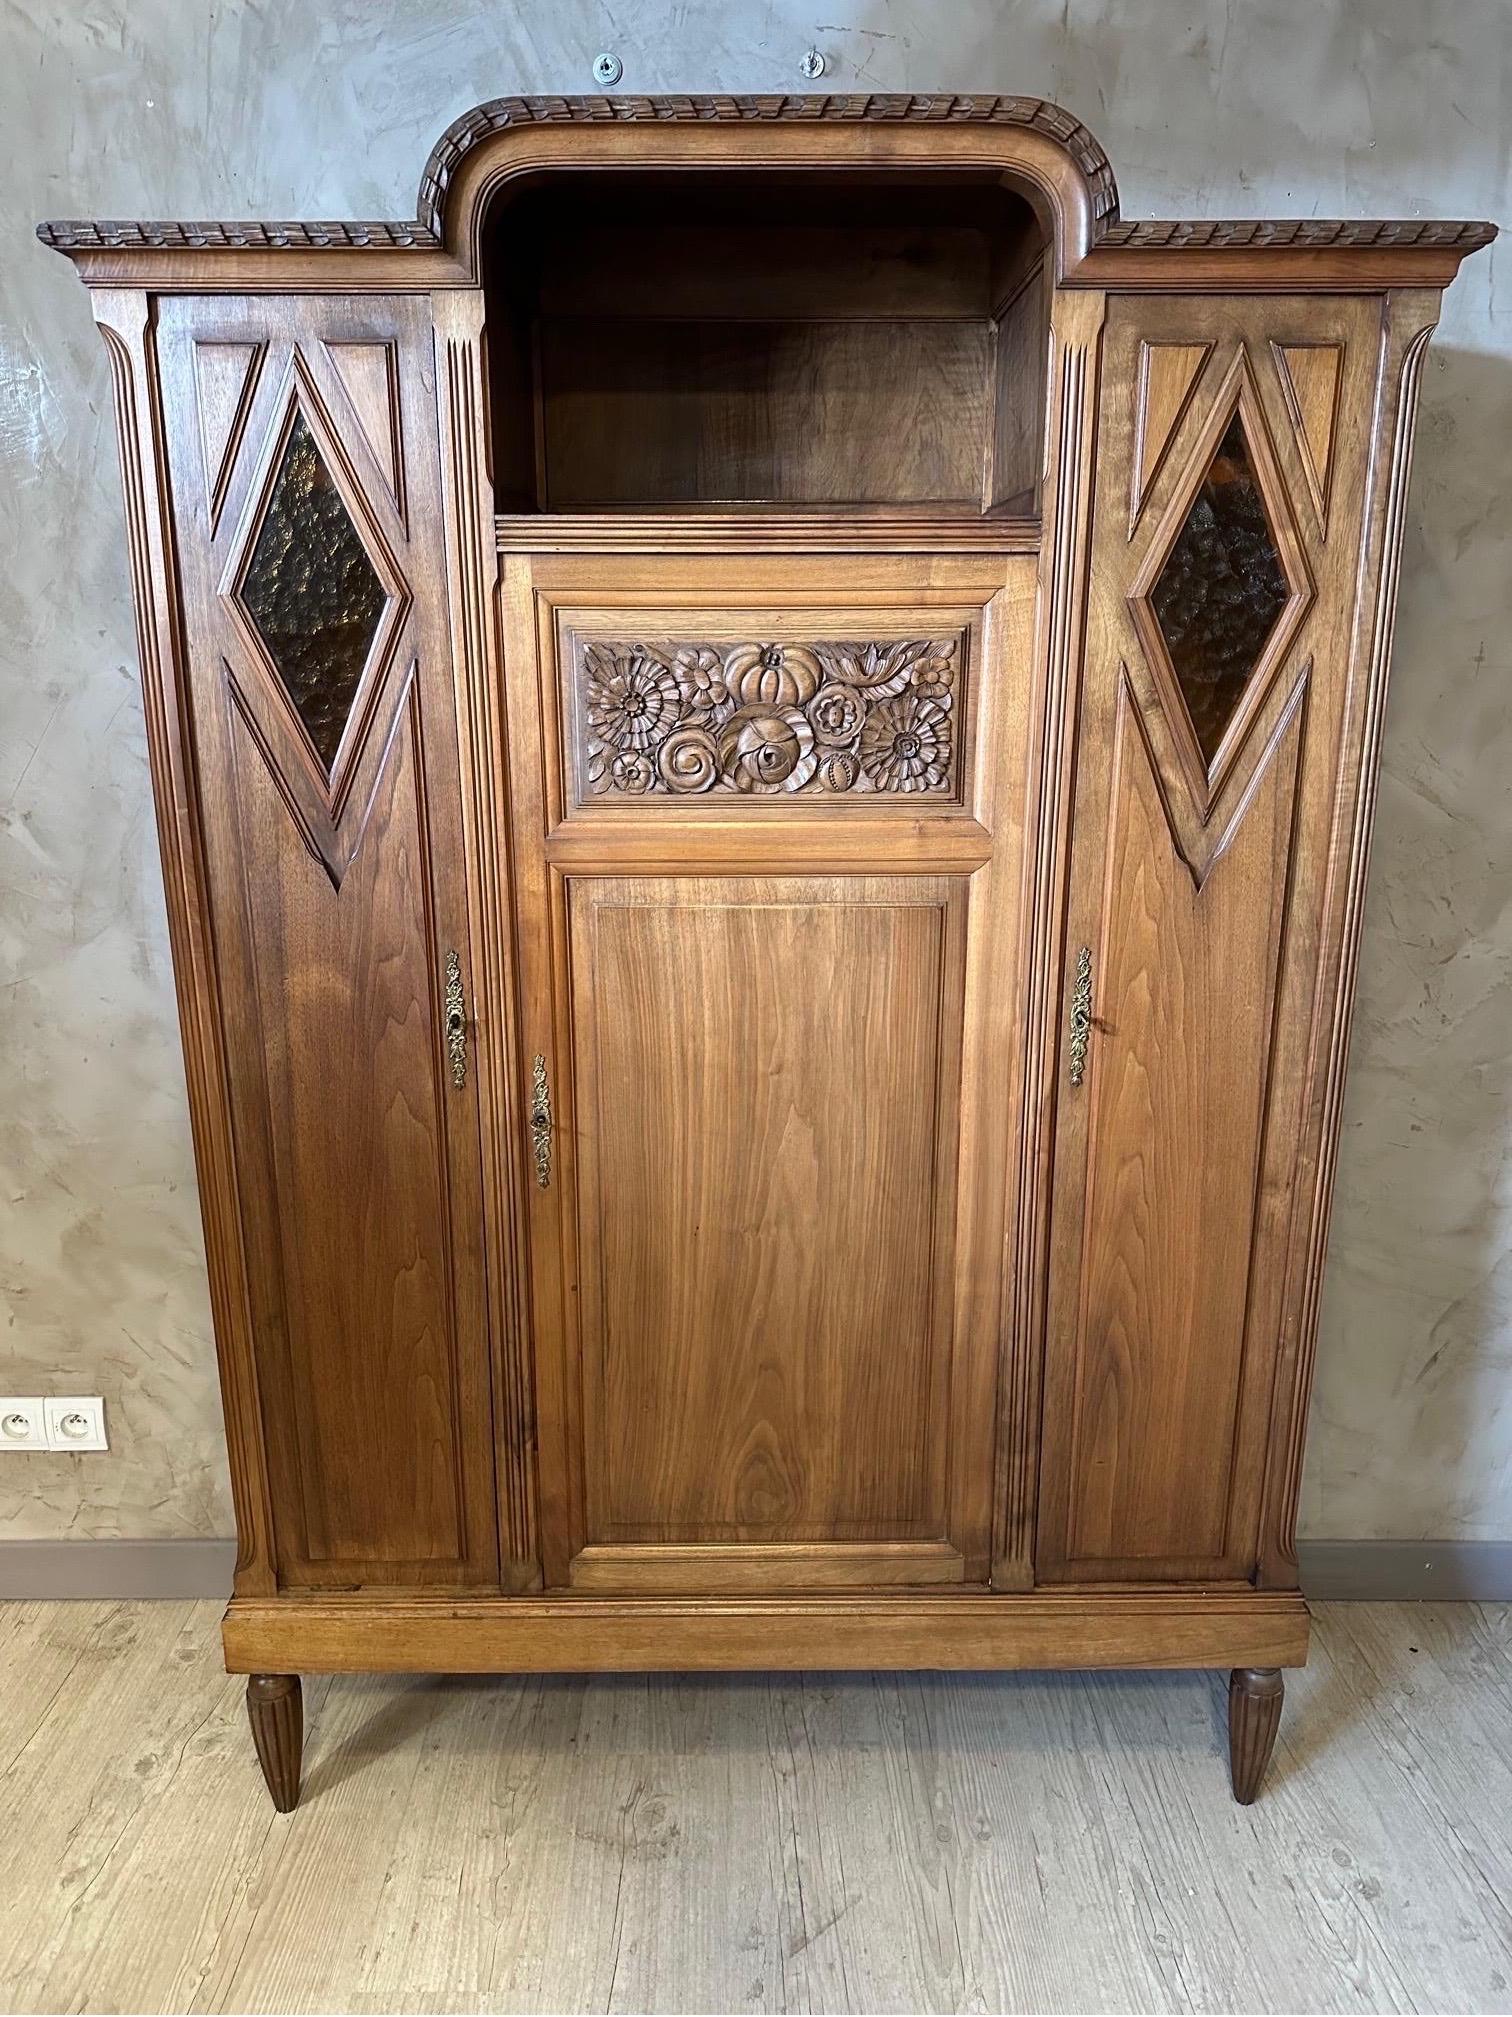 Very nice  art deco walnut cabinet. Several modular shelves.
Small octagonal windows in slightly amber glass.
Typical 1930s style. Very good condition and superb quality.